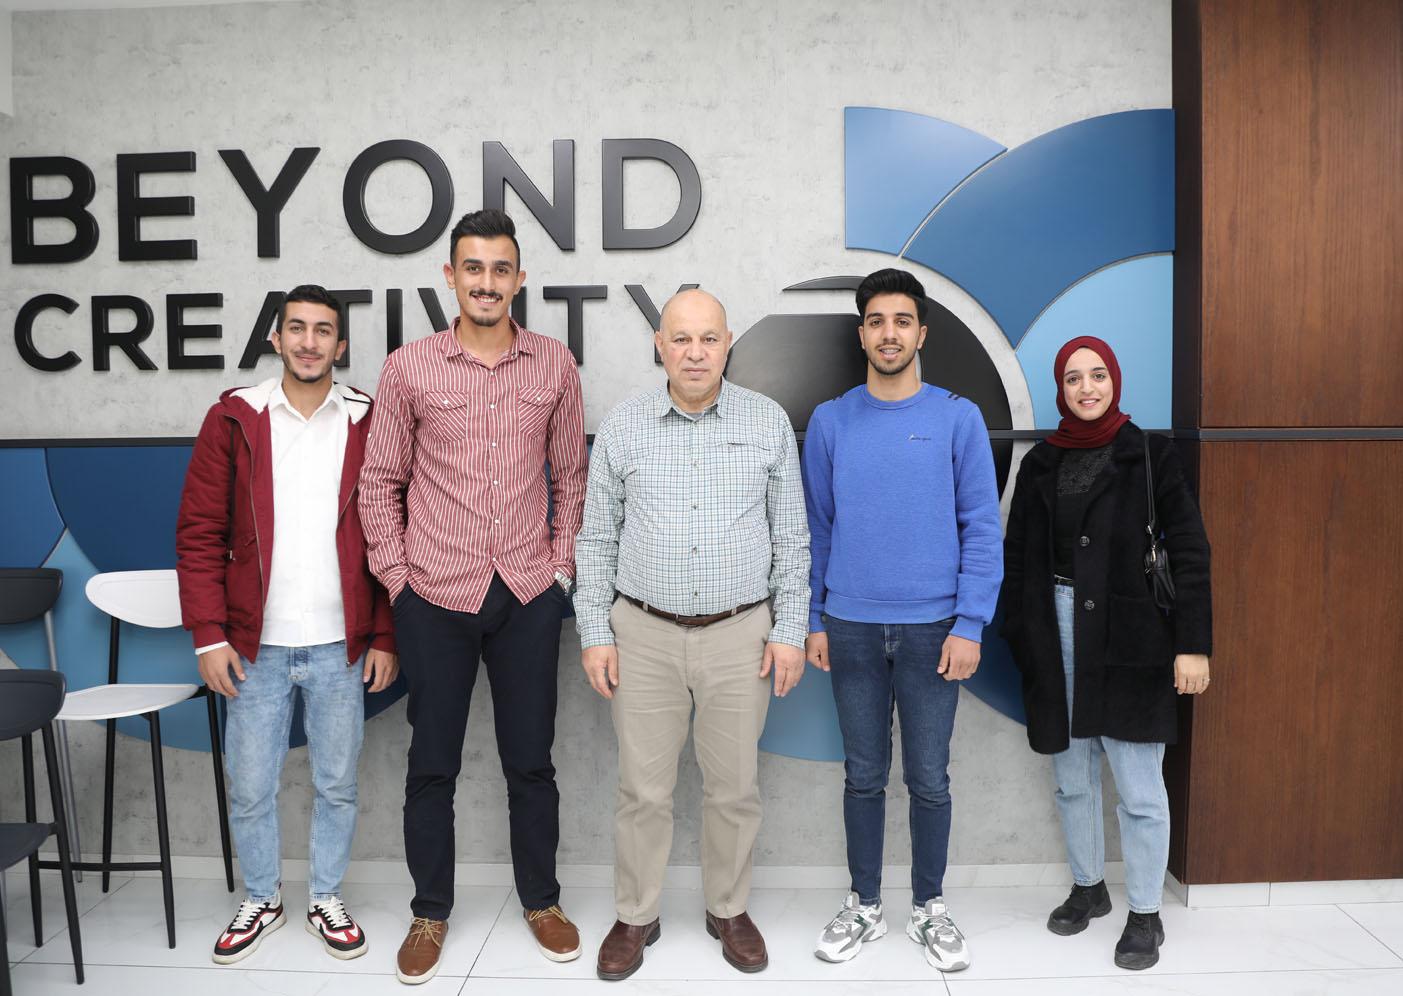 Royal hosts a delegation from the Medical Students Union at Hebron University